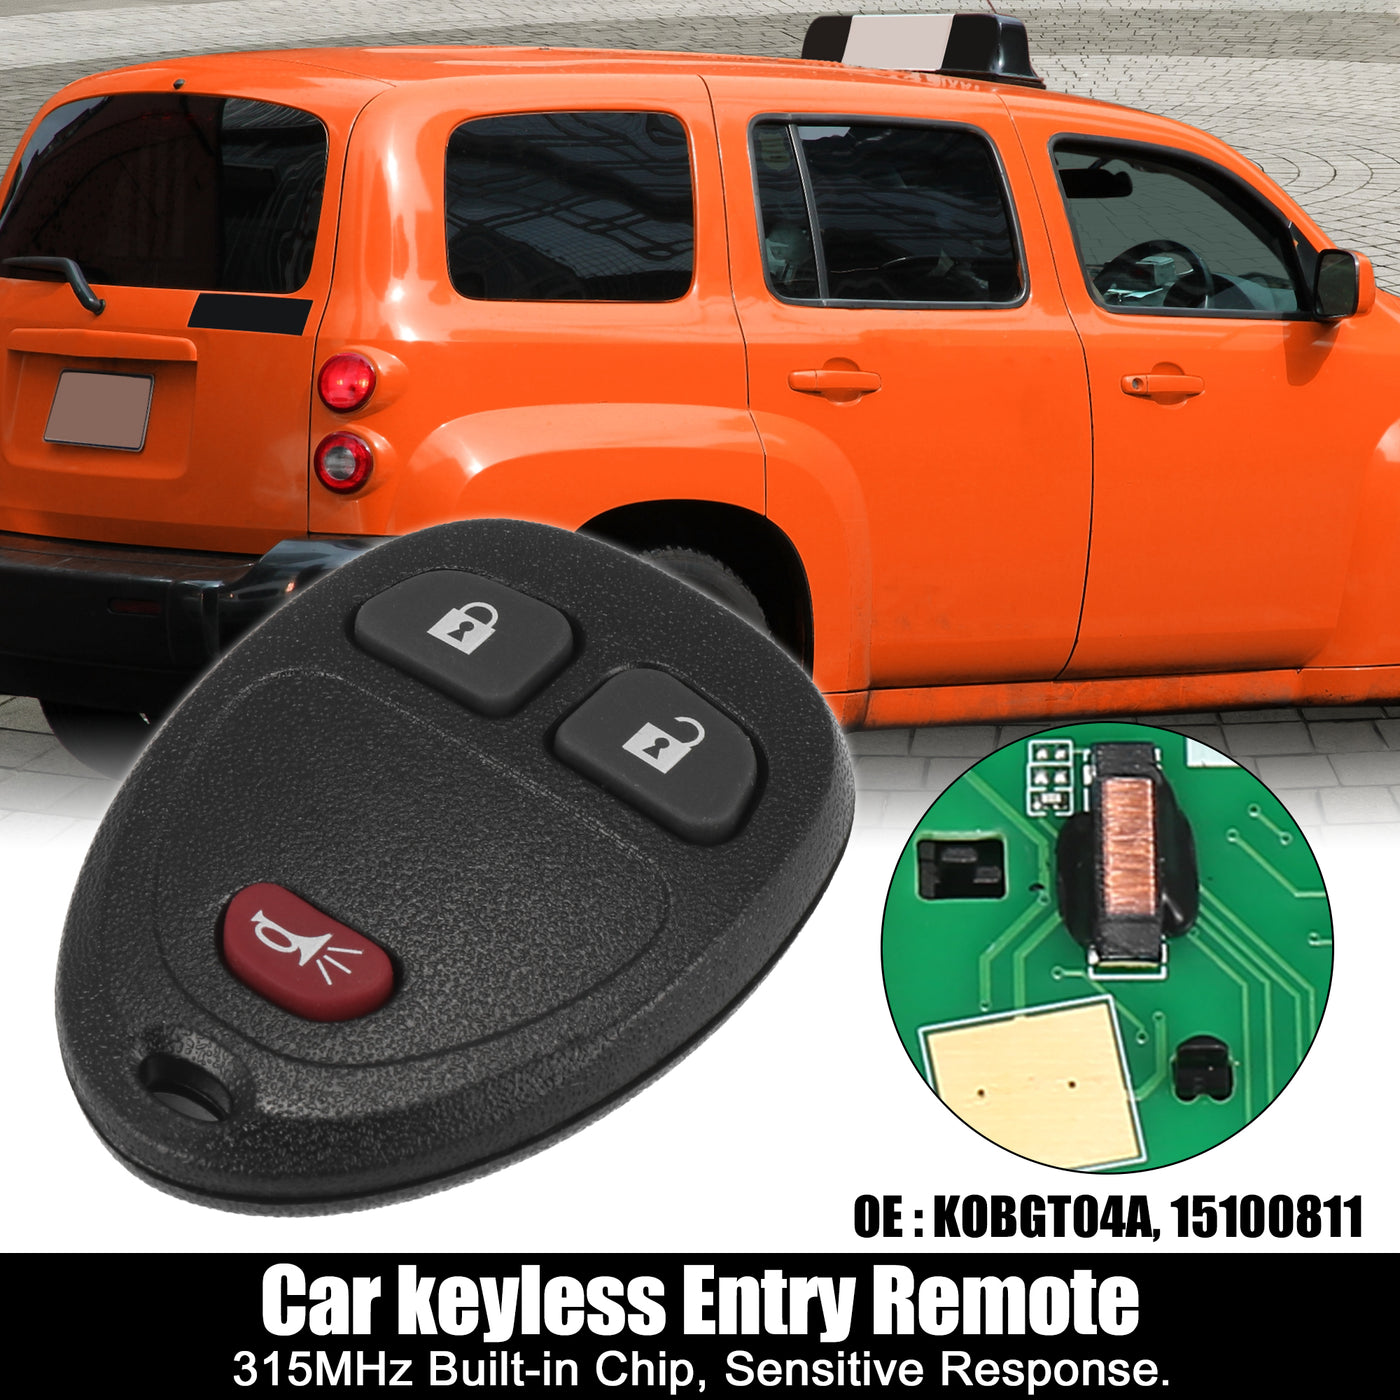 X AUTOHAUX 315MHz KOBGT04A Replacement Keyless Entry Remote Car Key Fob for Chevy HHR 06-11 Uplander 06-08 for Buick Terraza for Saturn Relay 05-07 for Pontiac Montana 15777636 3 Button